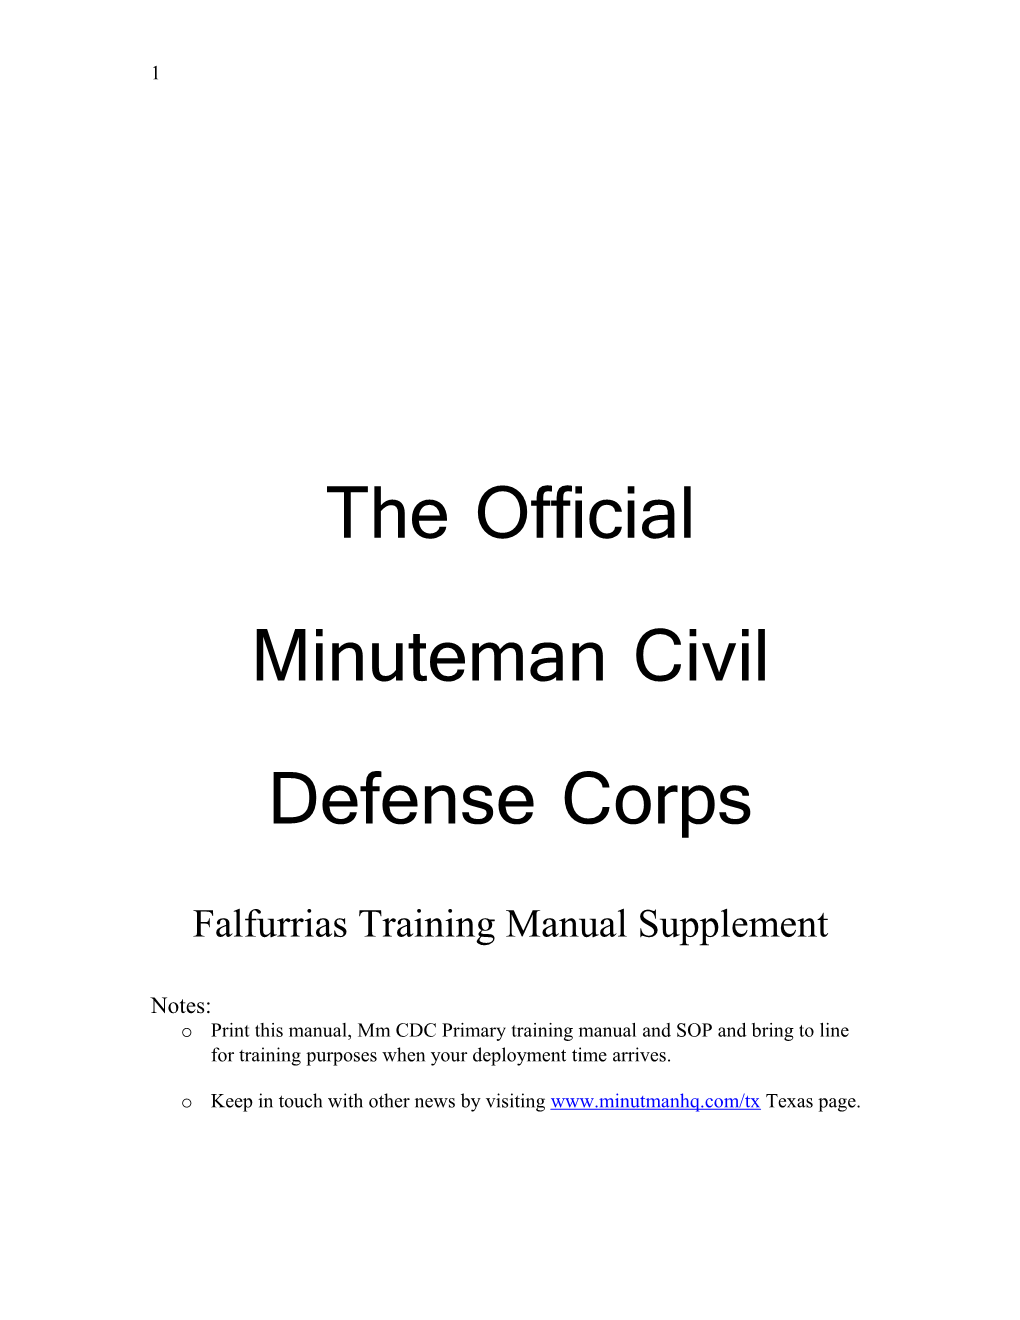 The Official Minuteman Civil Defense Corps